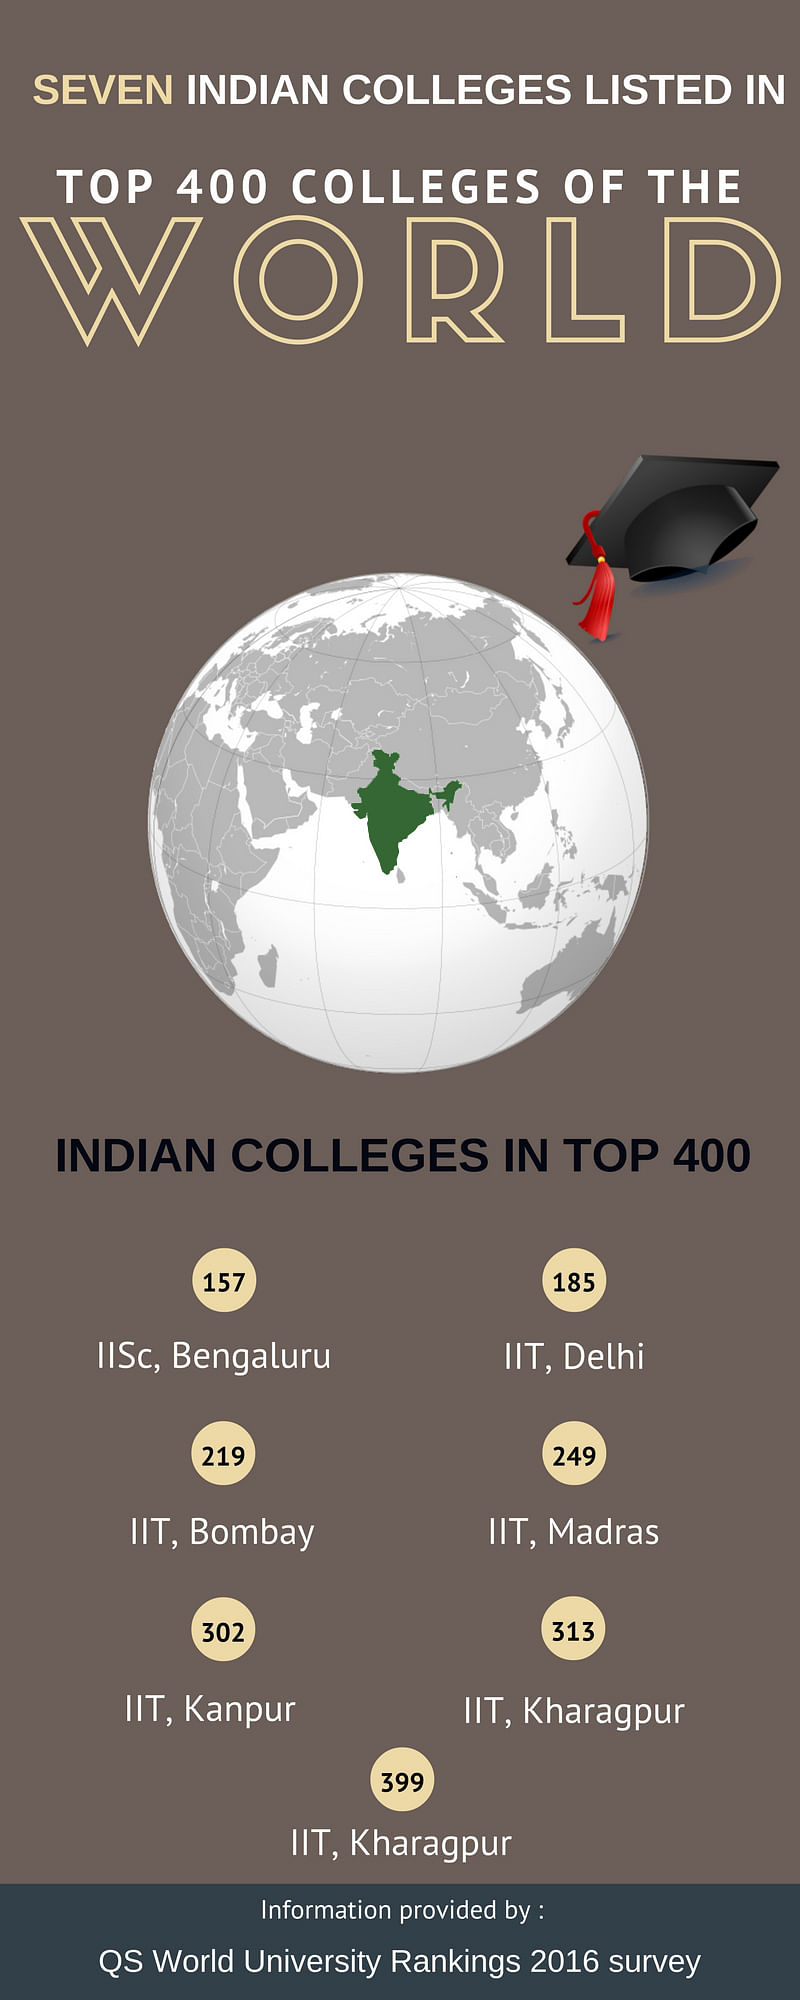 Indian universities continued to lag behind in the global top 200, with IISC dropping five places in ranking.